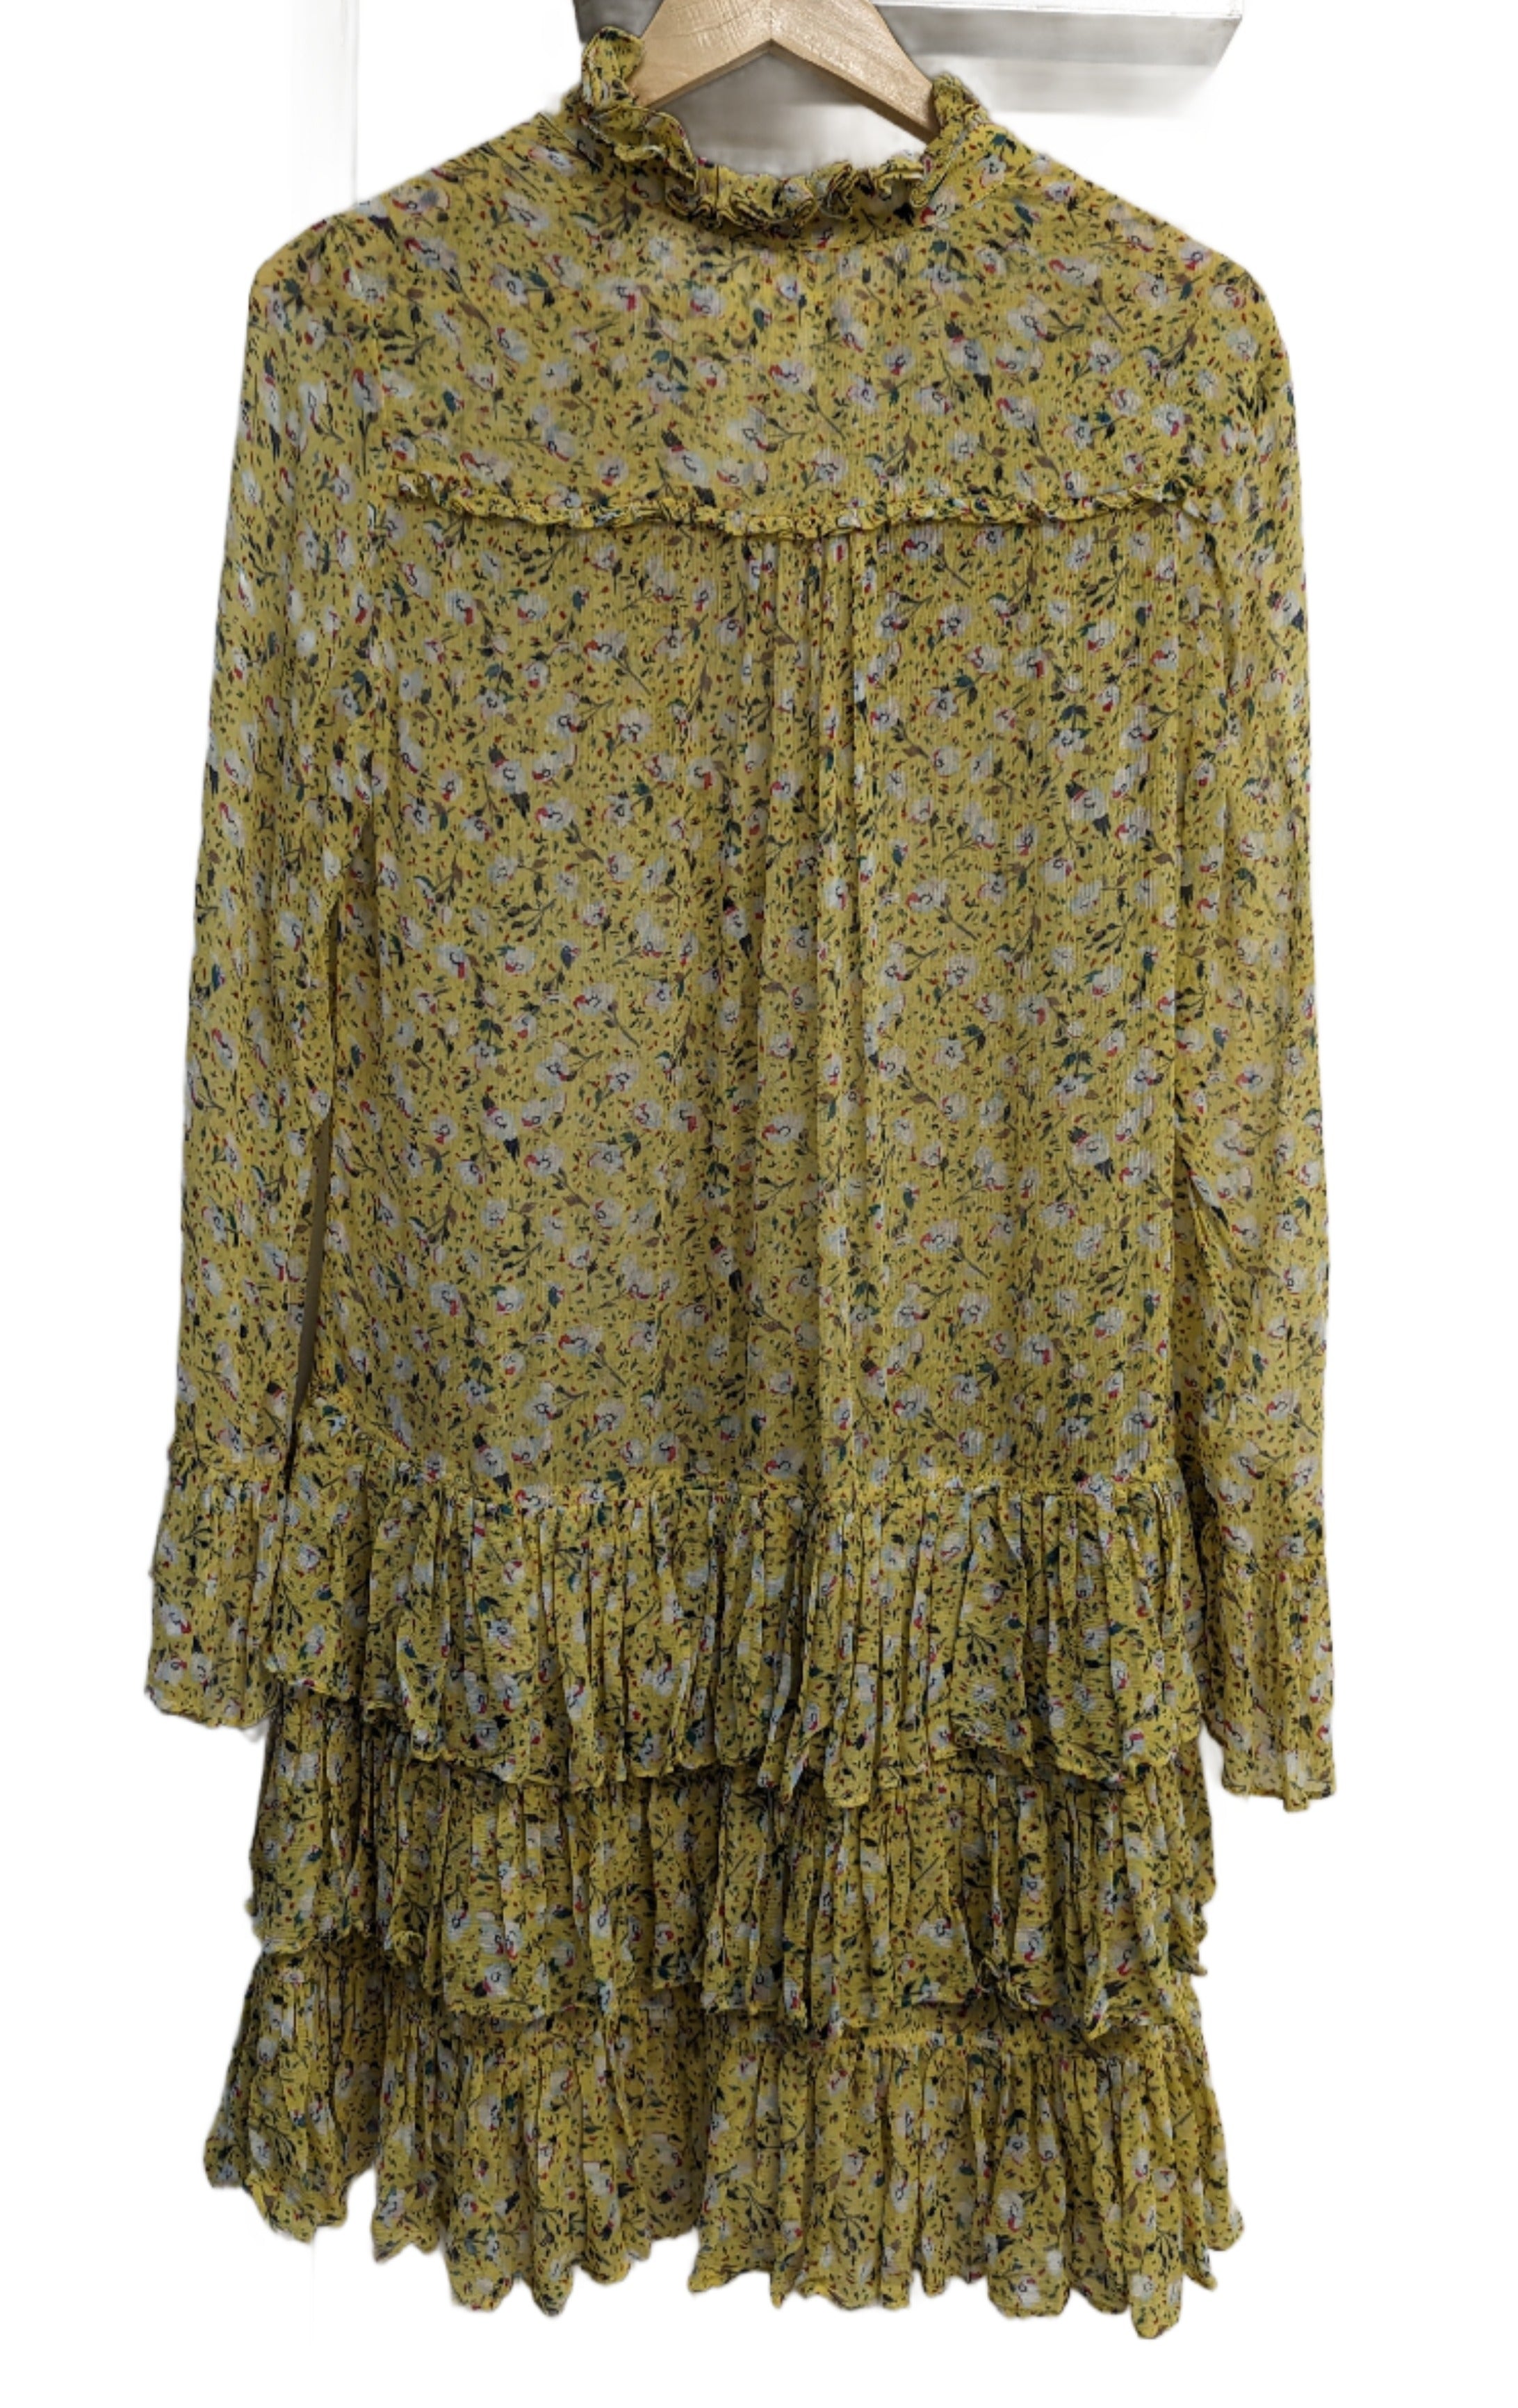 Zadig & Voltaire Yellow Floral Dress